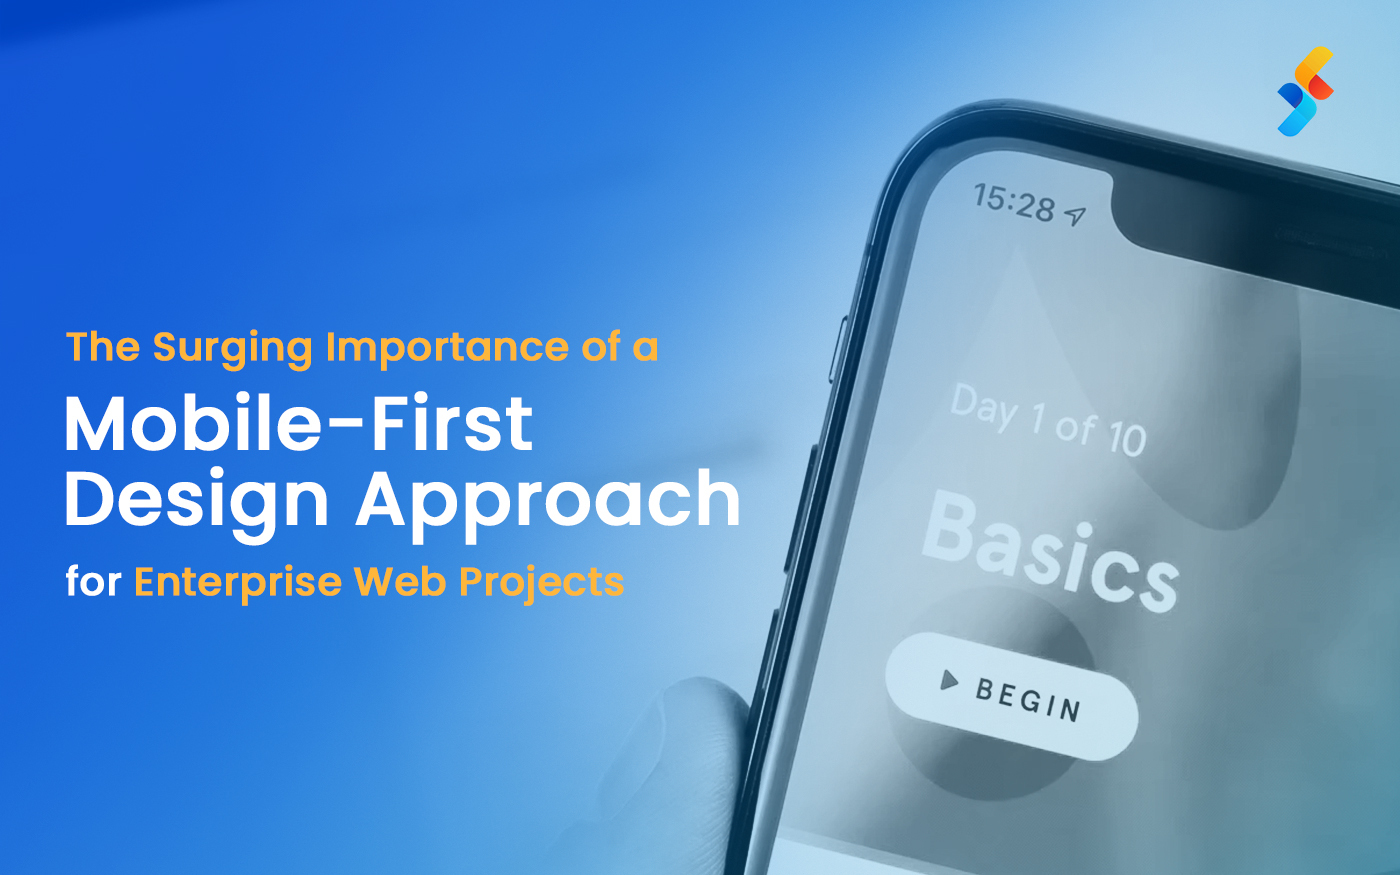 The Surging Importance of a Mobile-First Design Approach for Enterprise Web Projects